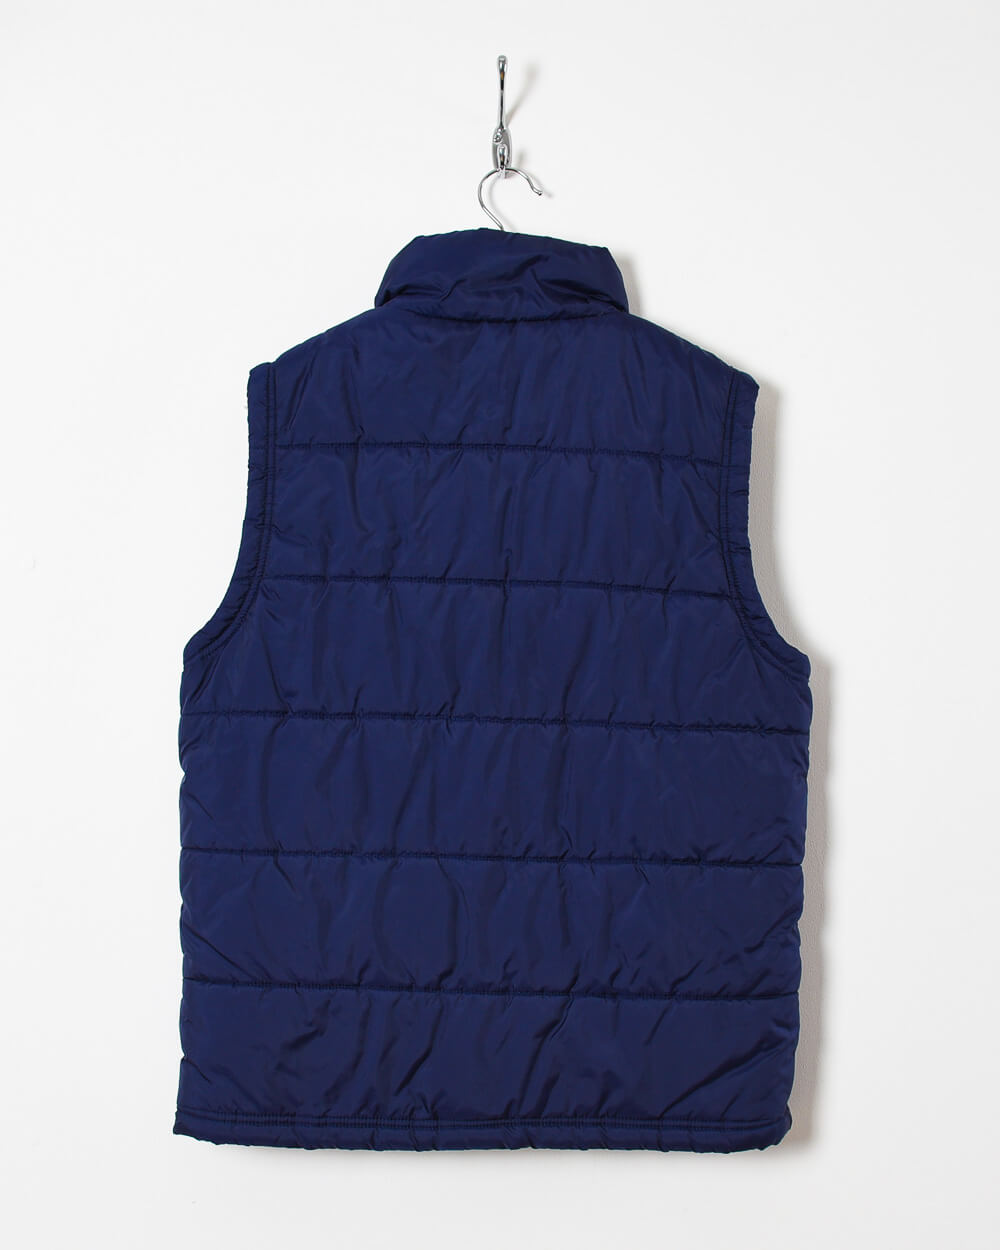 Kappa Down Gilet - Large - Domno Vintage 90s, 80s, 00s Retro and Vintage Clothing 